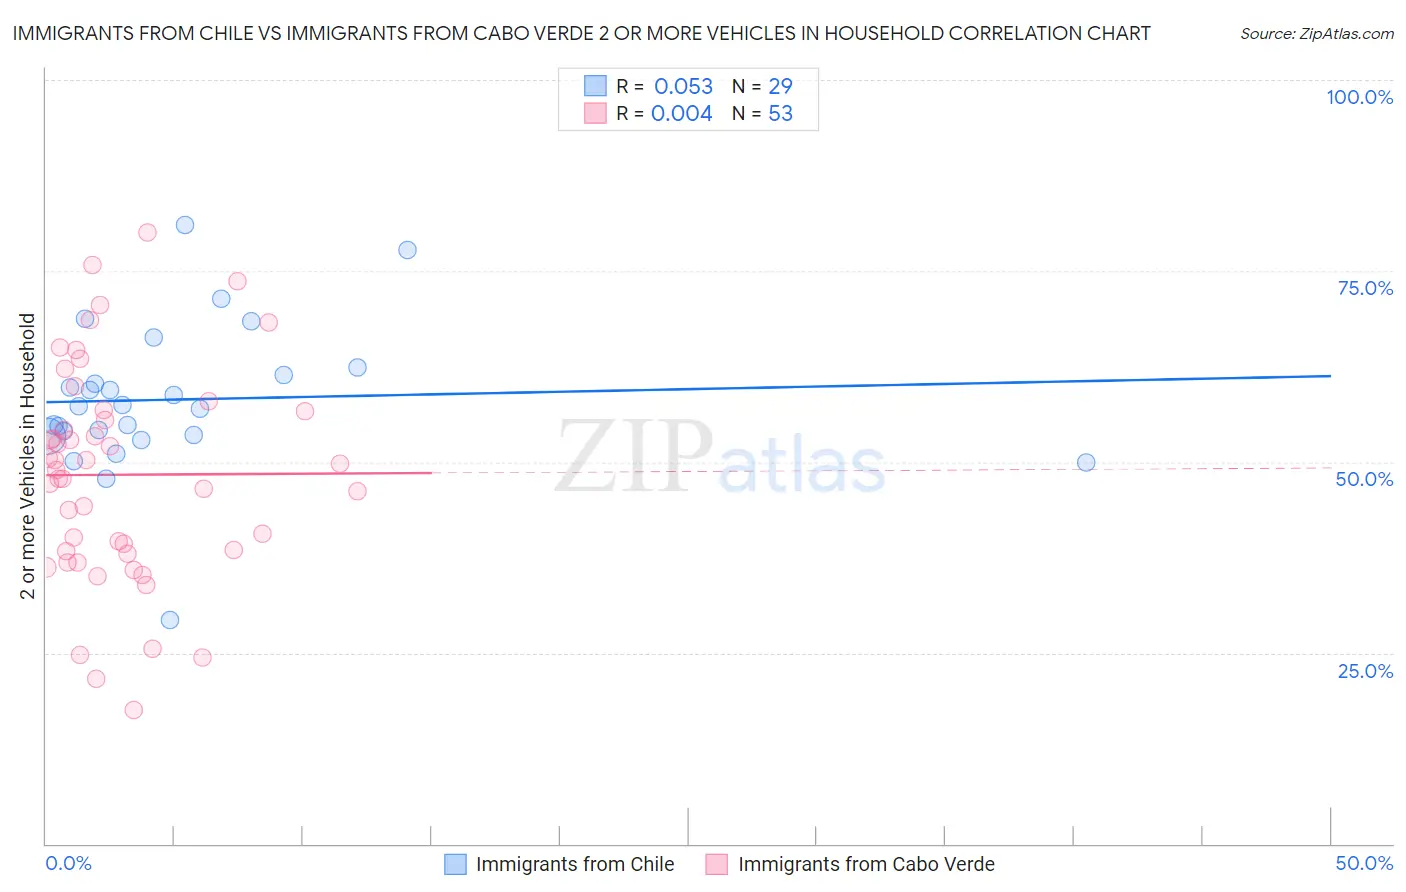 Immigrants from Chile vs Immigrants from Cabo Verde 2 or more Vehicles in Household